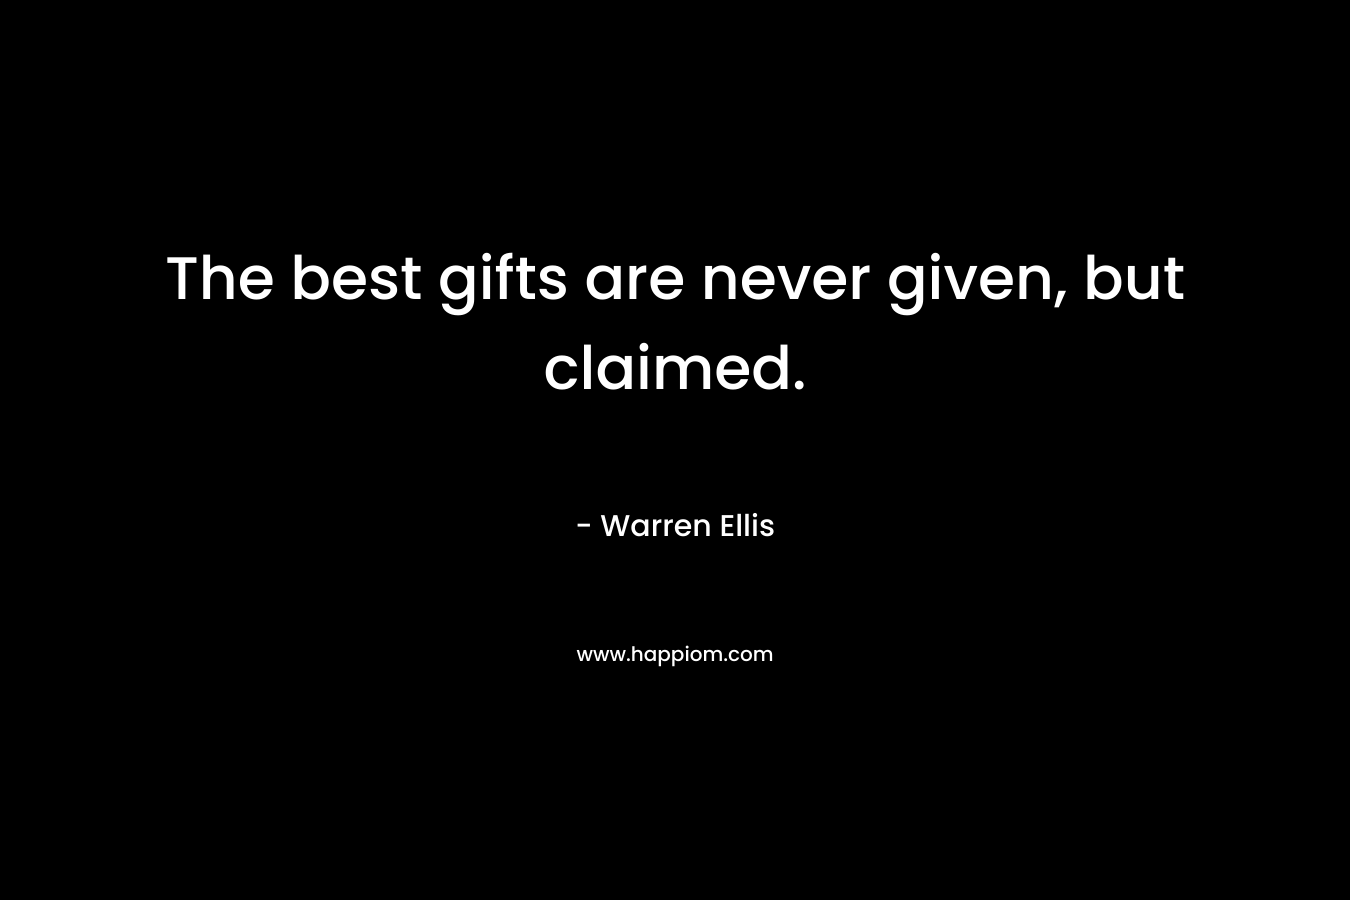 The best gifts are never given, but claimed.